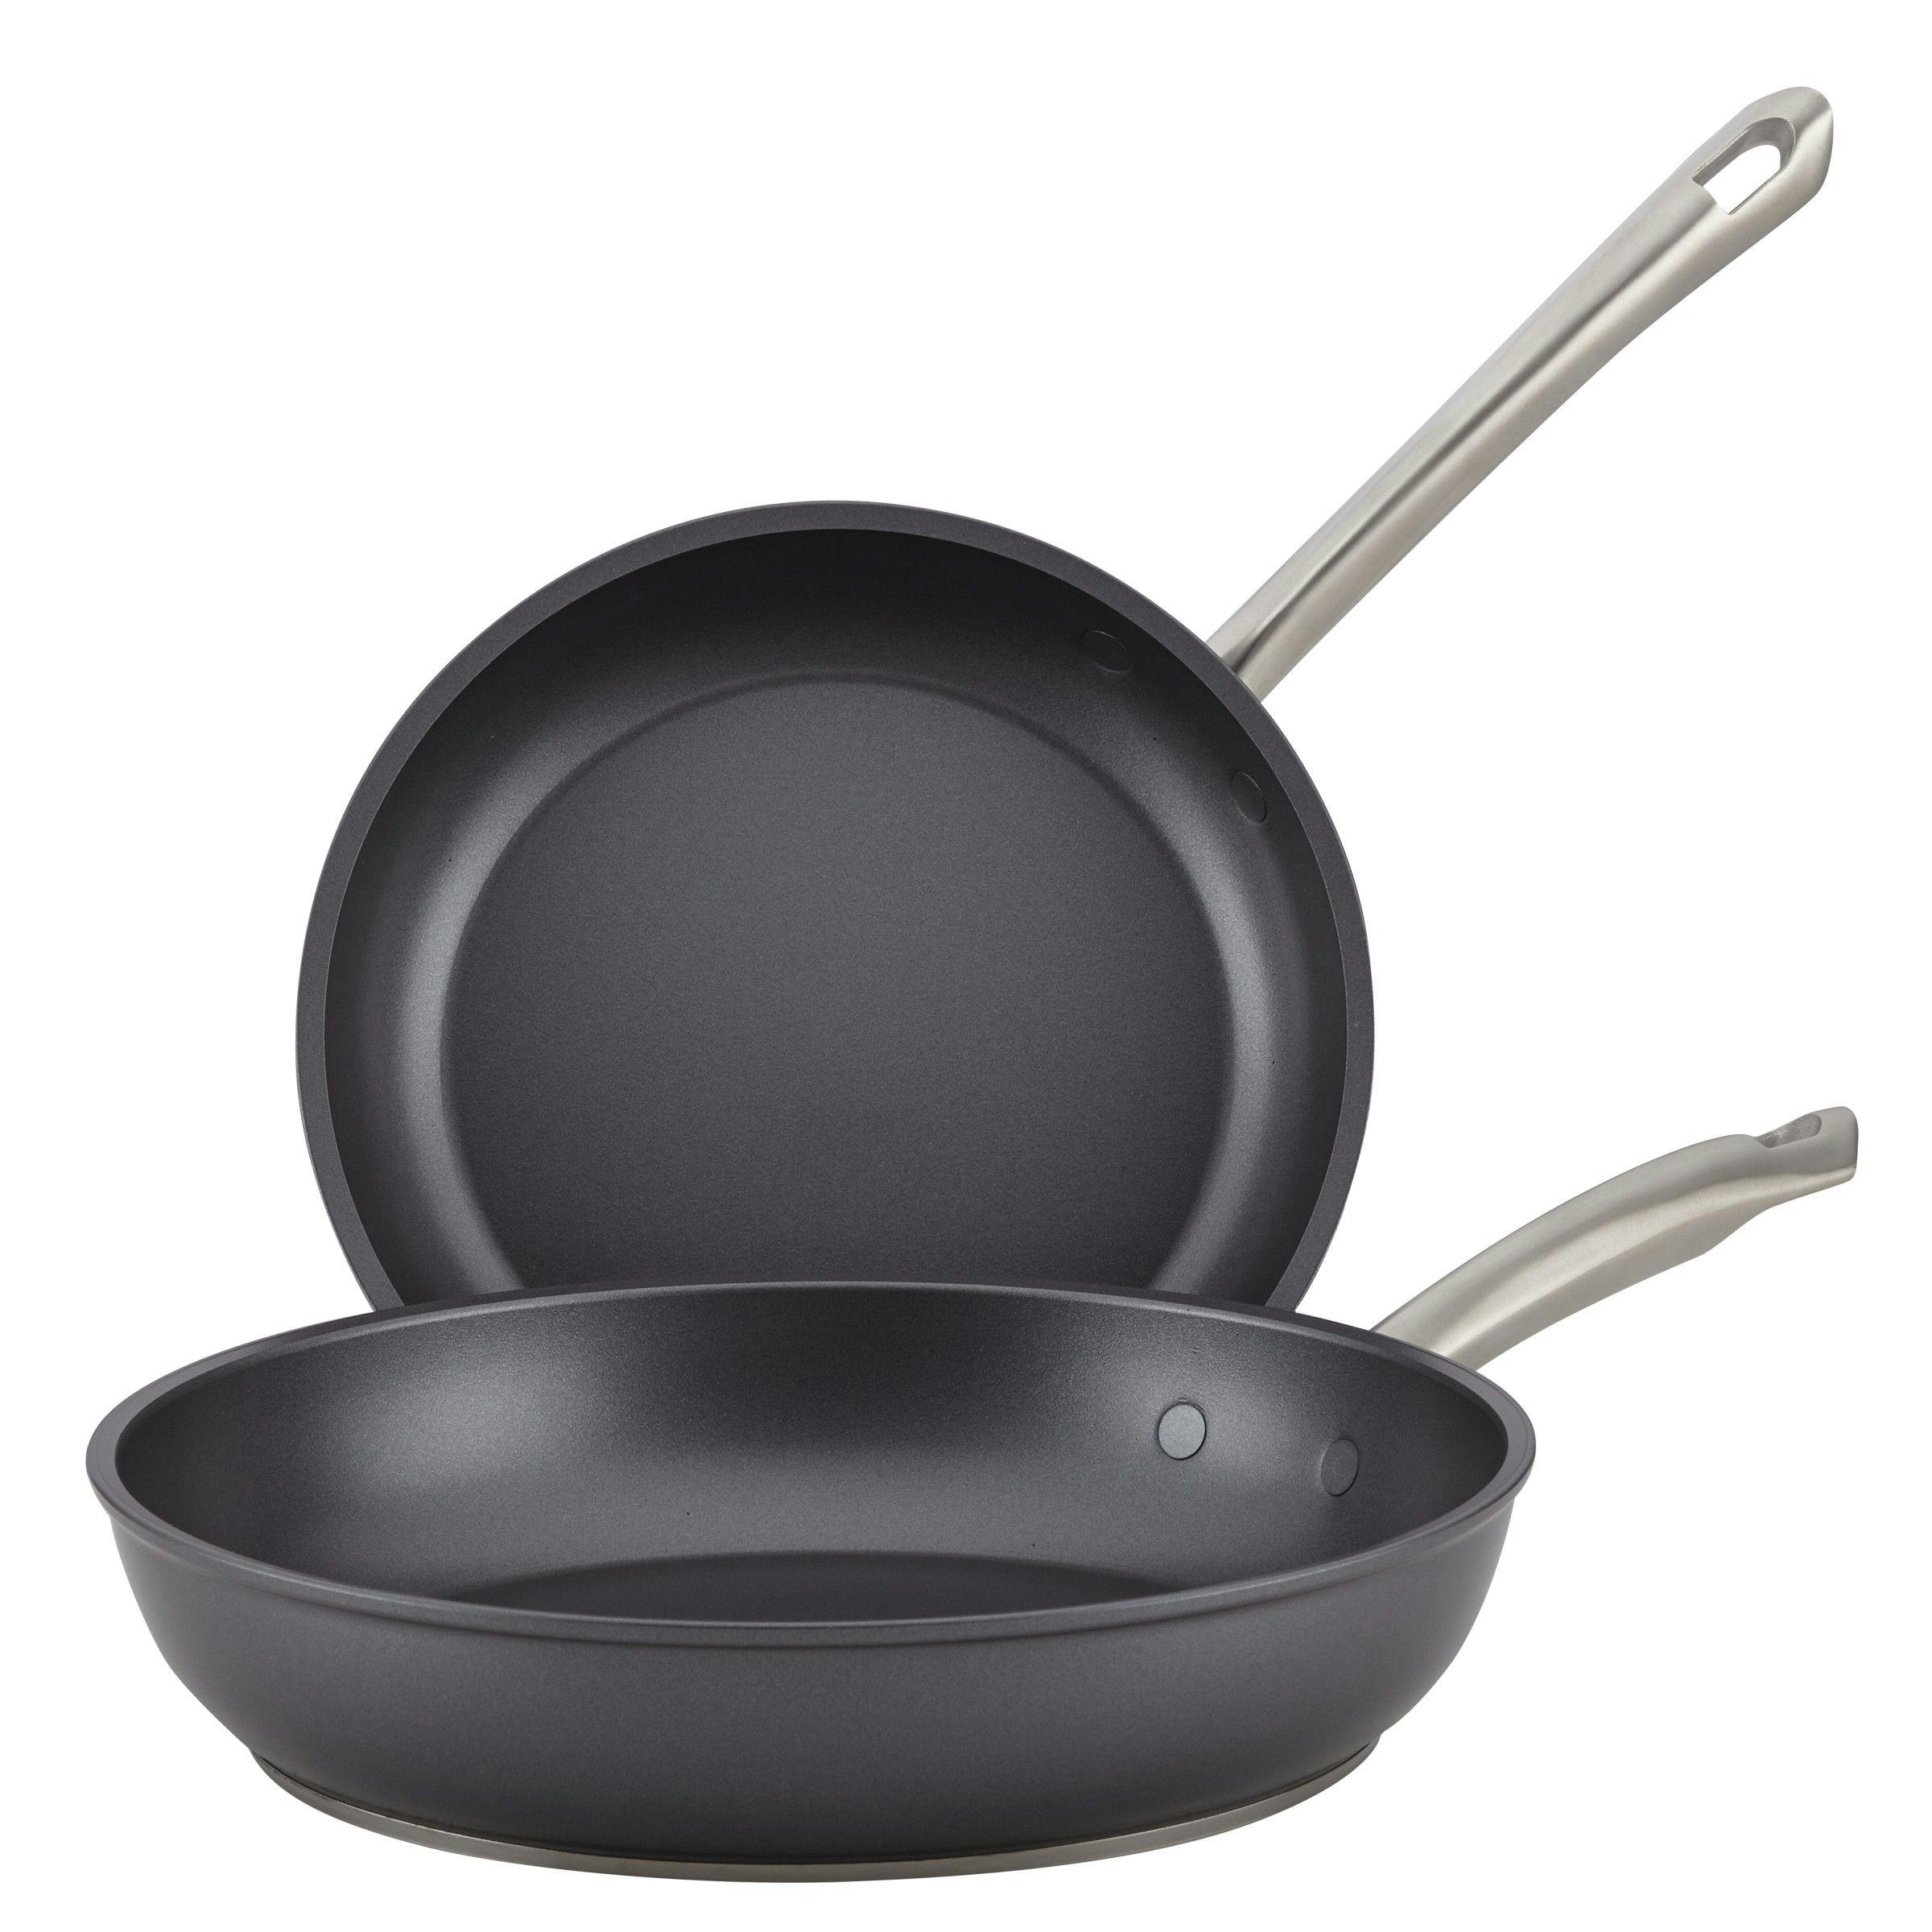 Anolon Accolade Hard Anodized Nonstick Induction Frying Pan Set, 2-Piece, Gray